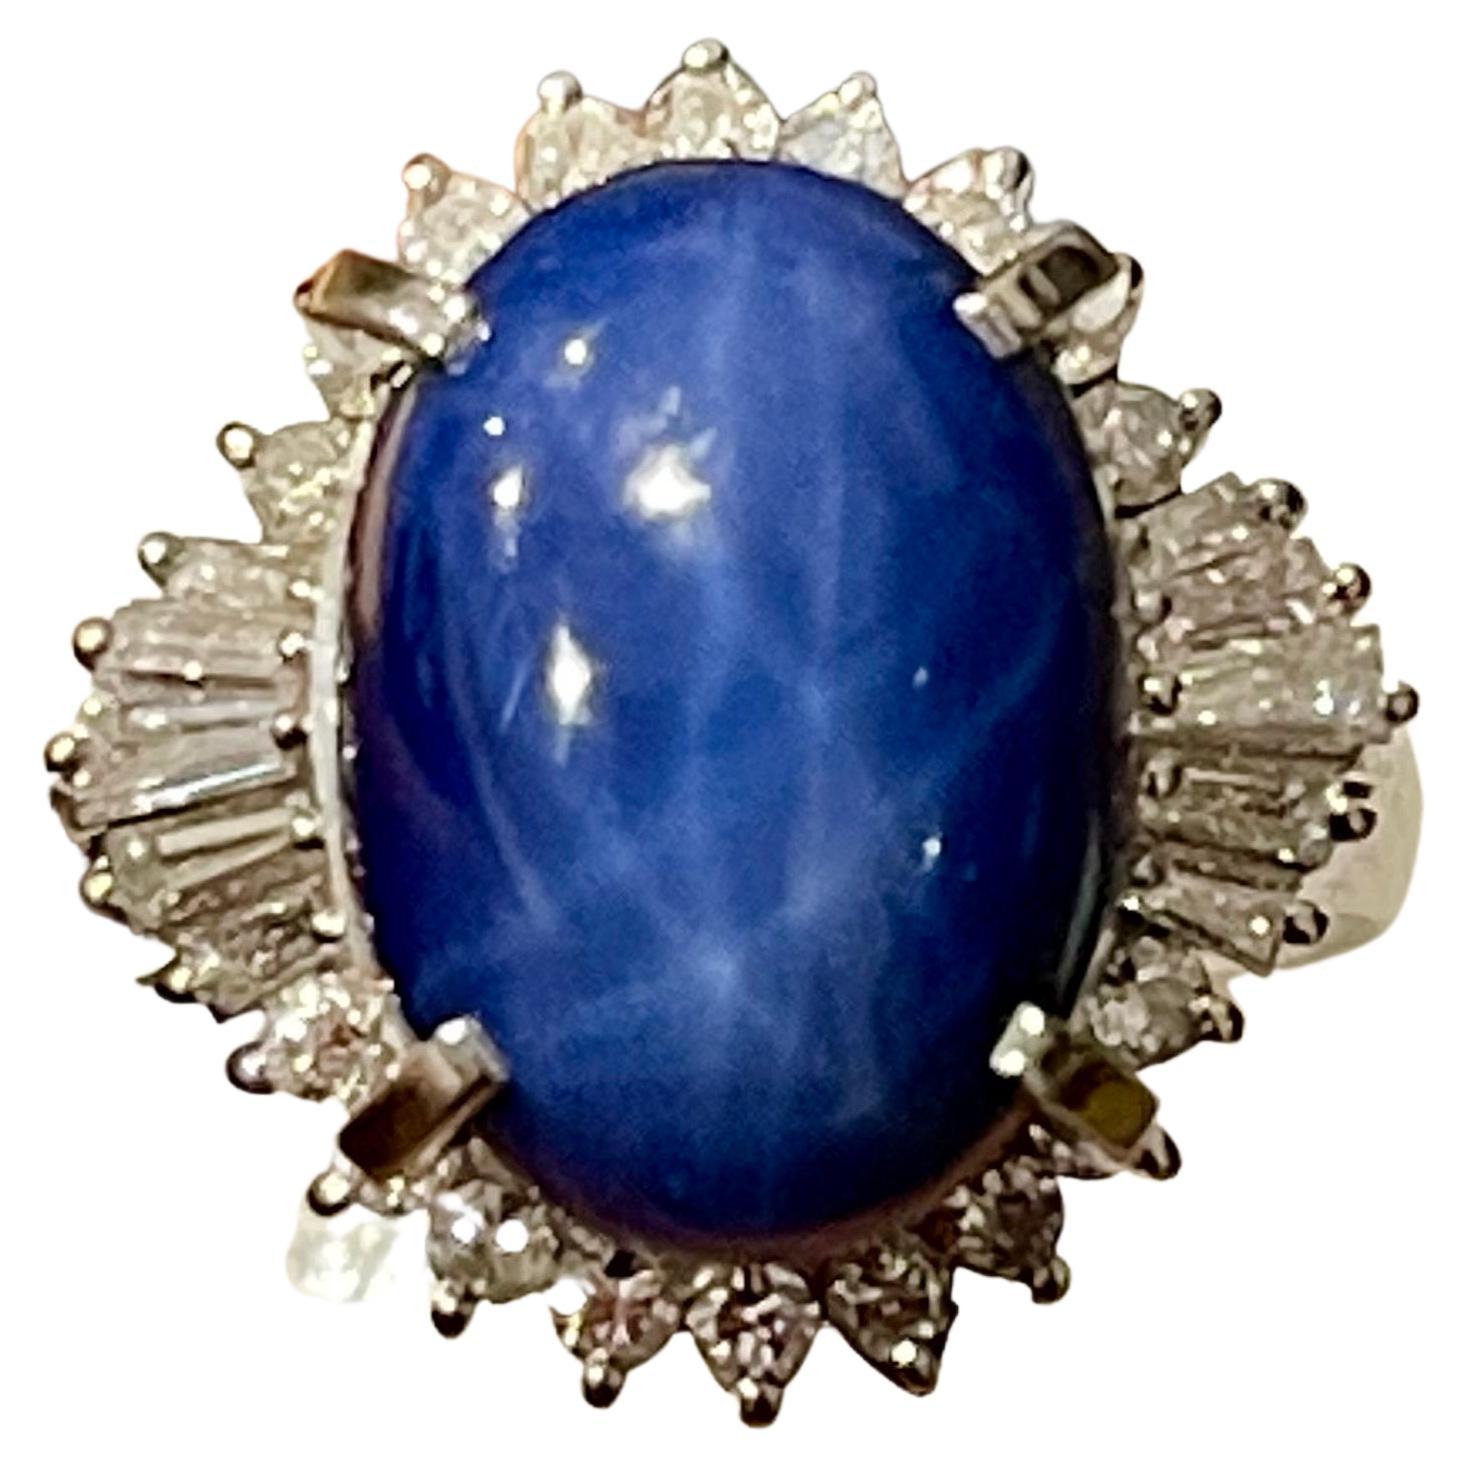 8.12 Ct Natural Star Sapphire Cabochon Ring in Platinum Size 6
Platinum 10.9 Grams
Sapphire Cabochon  size 10X15MM
Beautiful star on the sapphire.
Ring Size 6  ( it can be resized to any size for free of charge)
Brilliant cut diamonds and baguettes